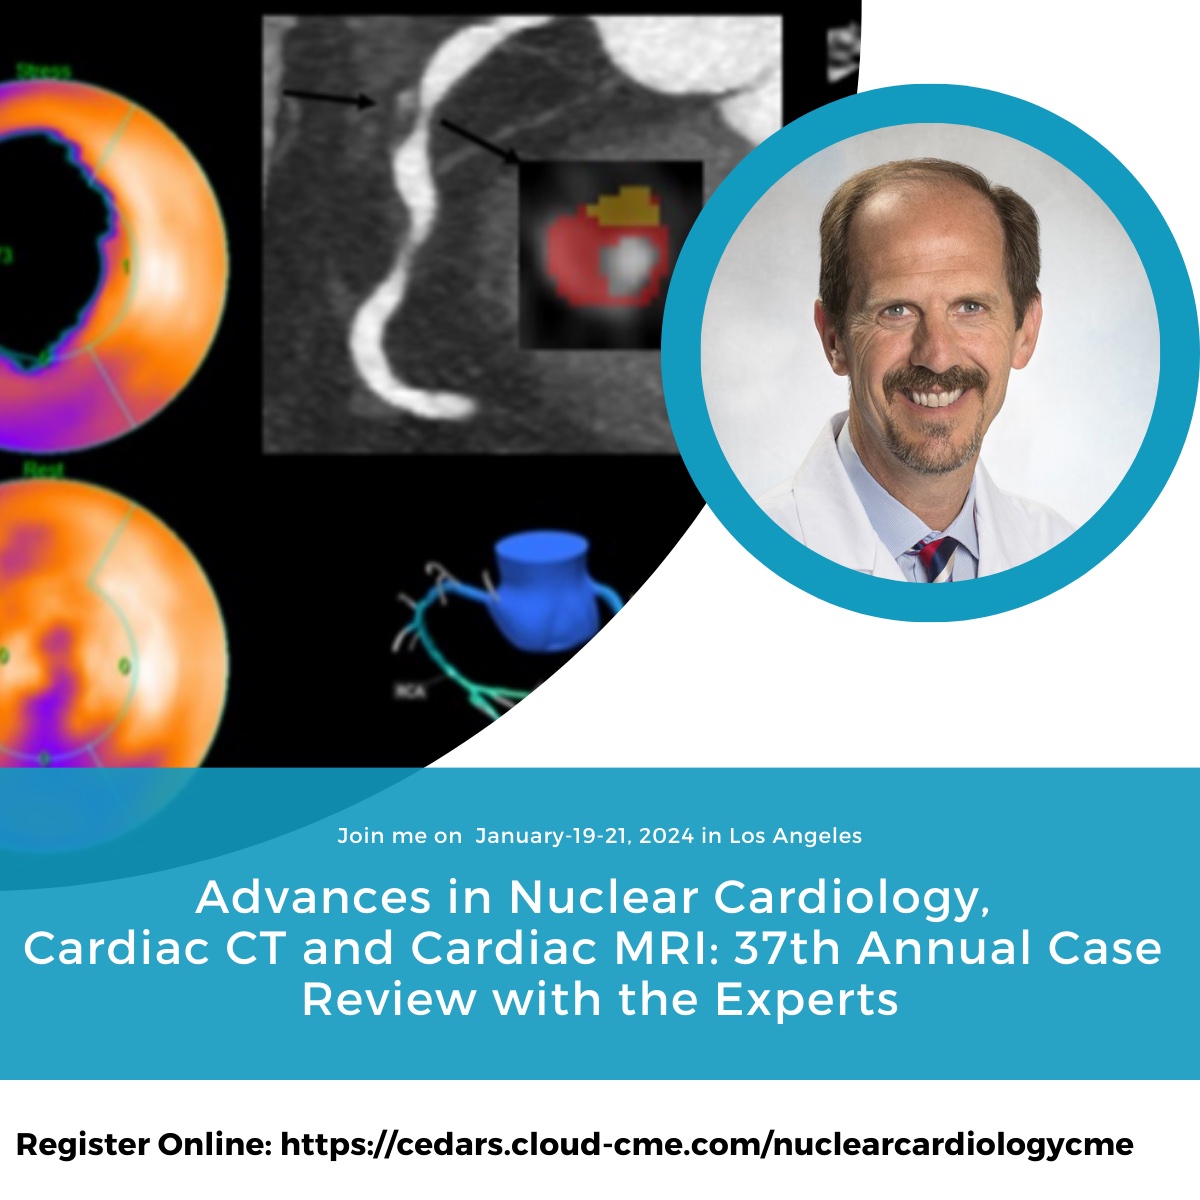 🌟 Unlock the Power of Cardiac Imaging and join us Jan 19-21, 2024. Hands down the best course to master the latest in cardiac imaging with expert insights, case studies, and interactive hands-on learning! #ACCFIT #ACCImaging #CVnuc #YesCCT #YesCMR